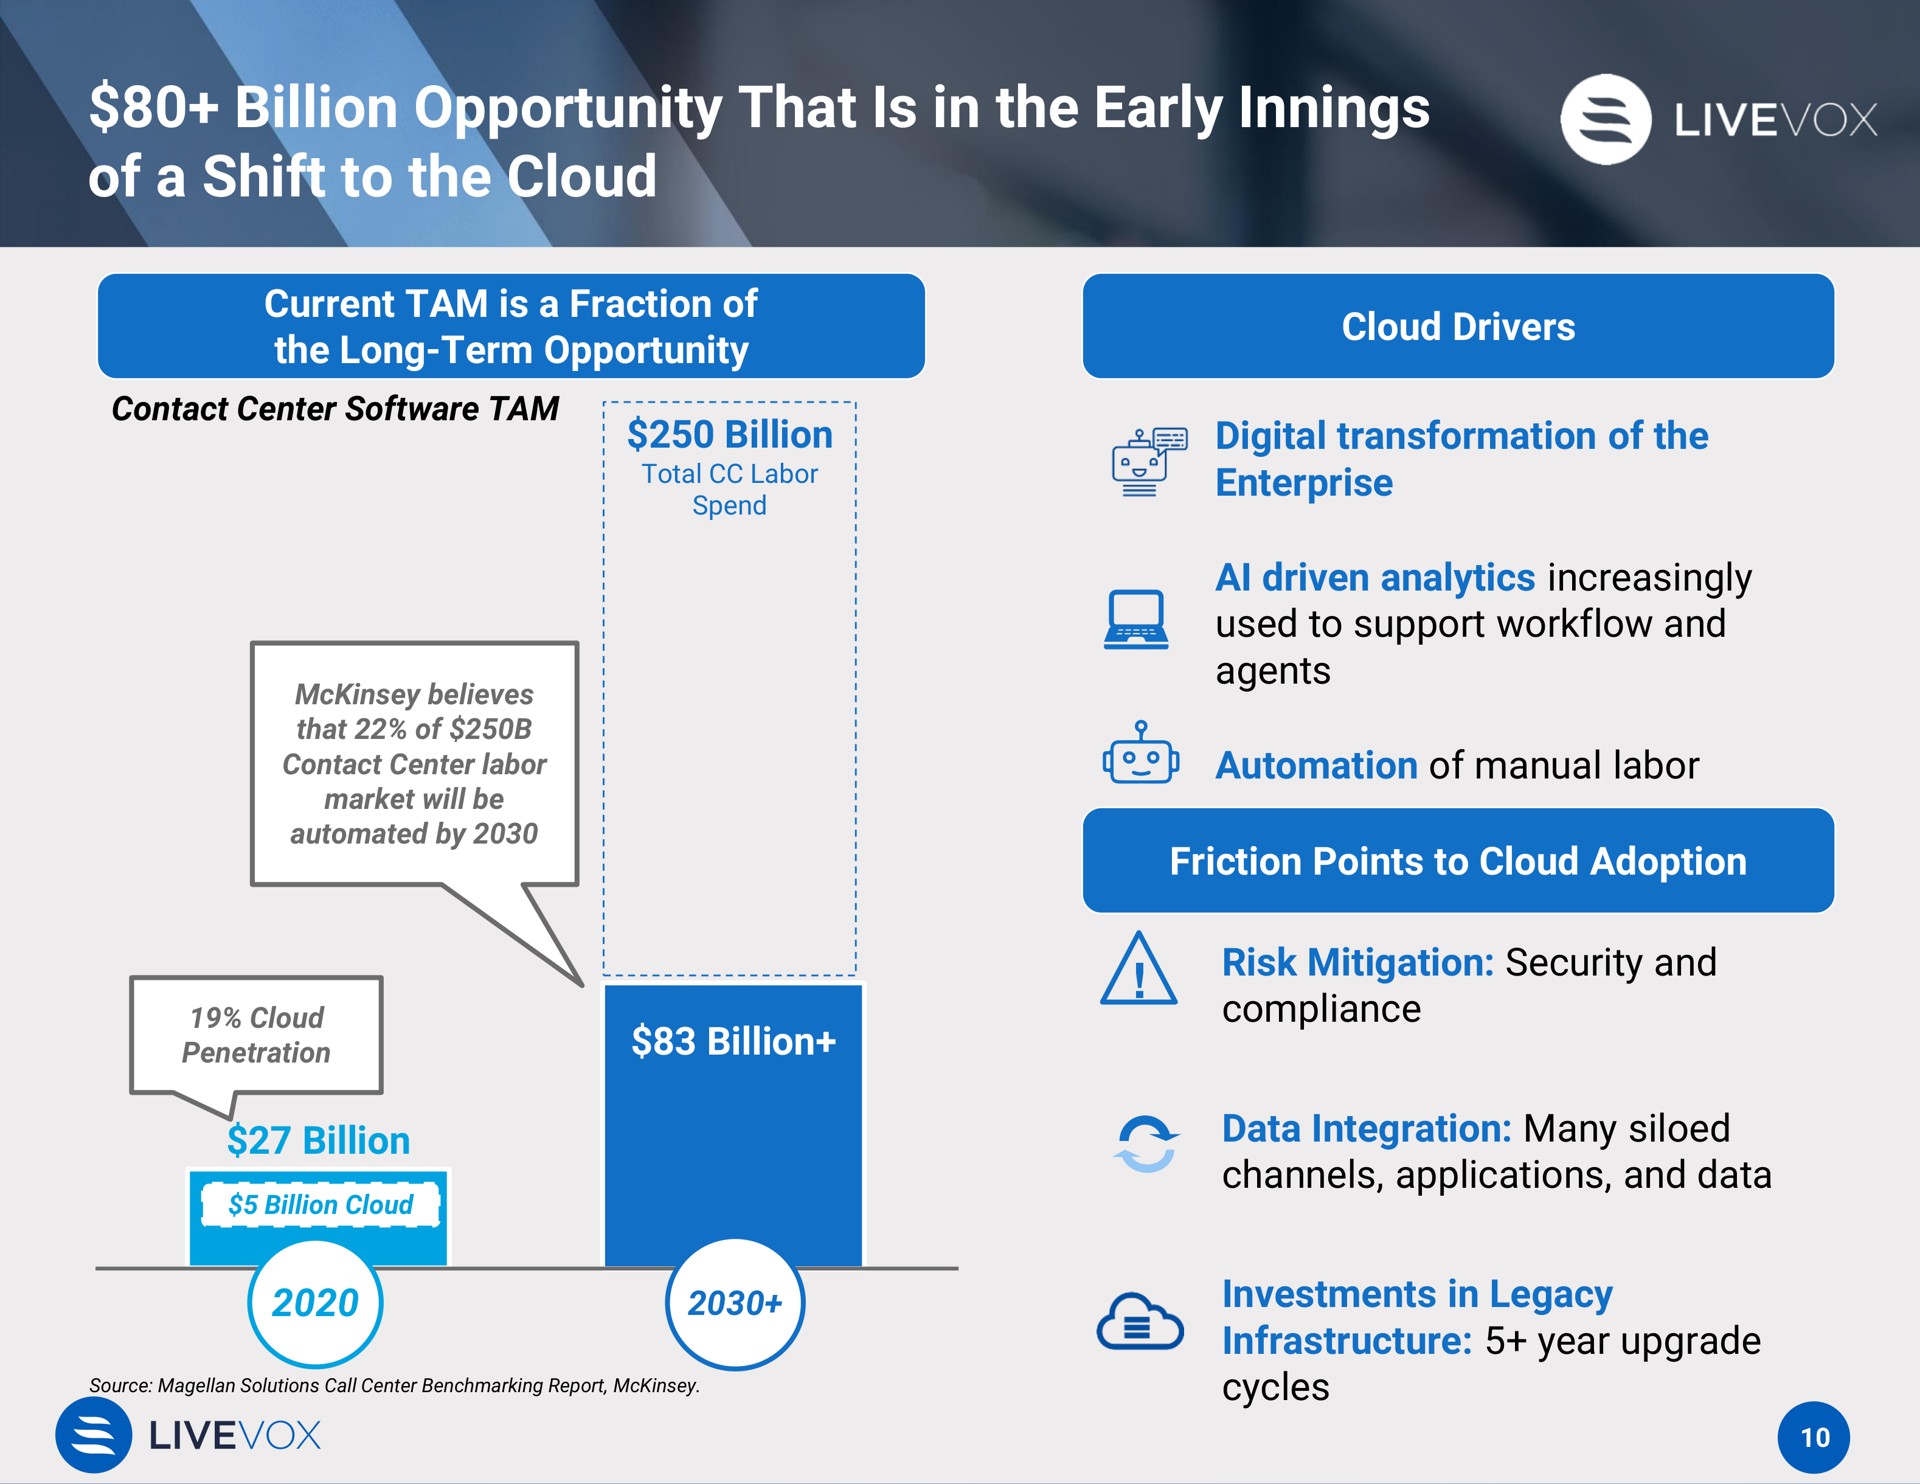 billion opportunity that is in the early innings of a shift to the cloud | LiveVox